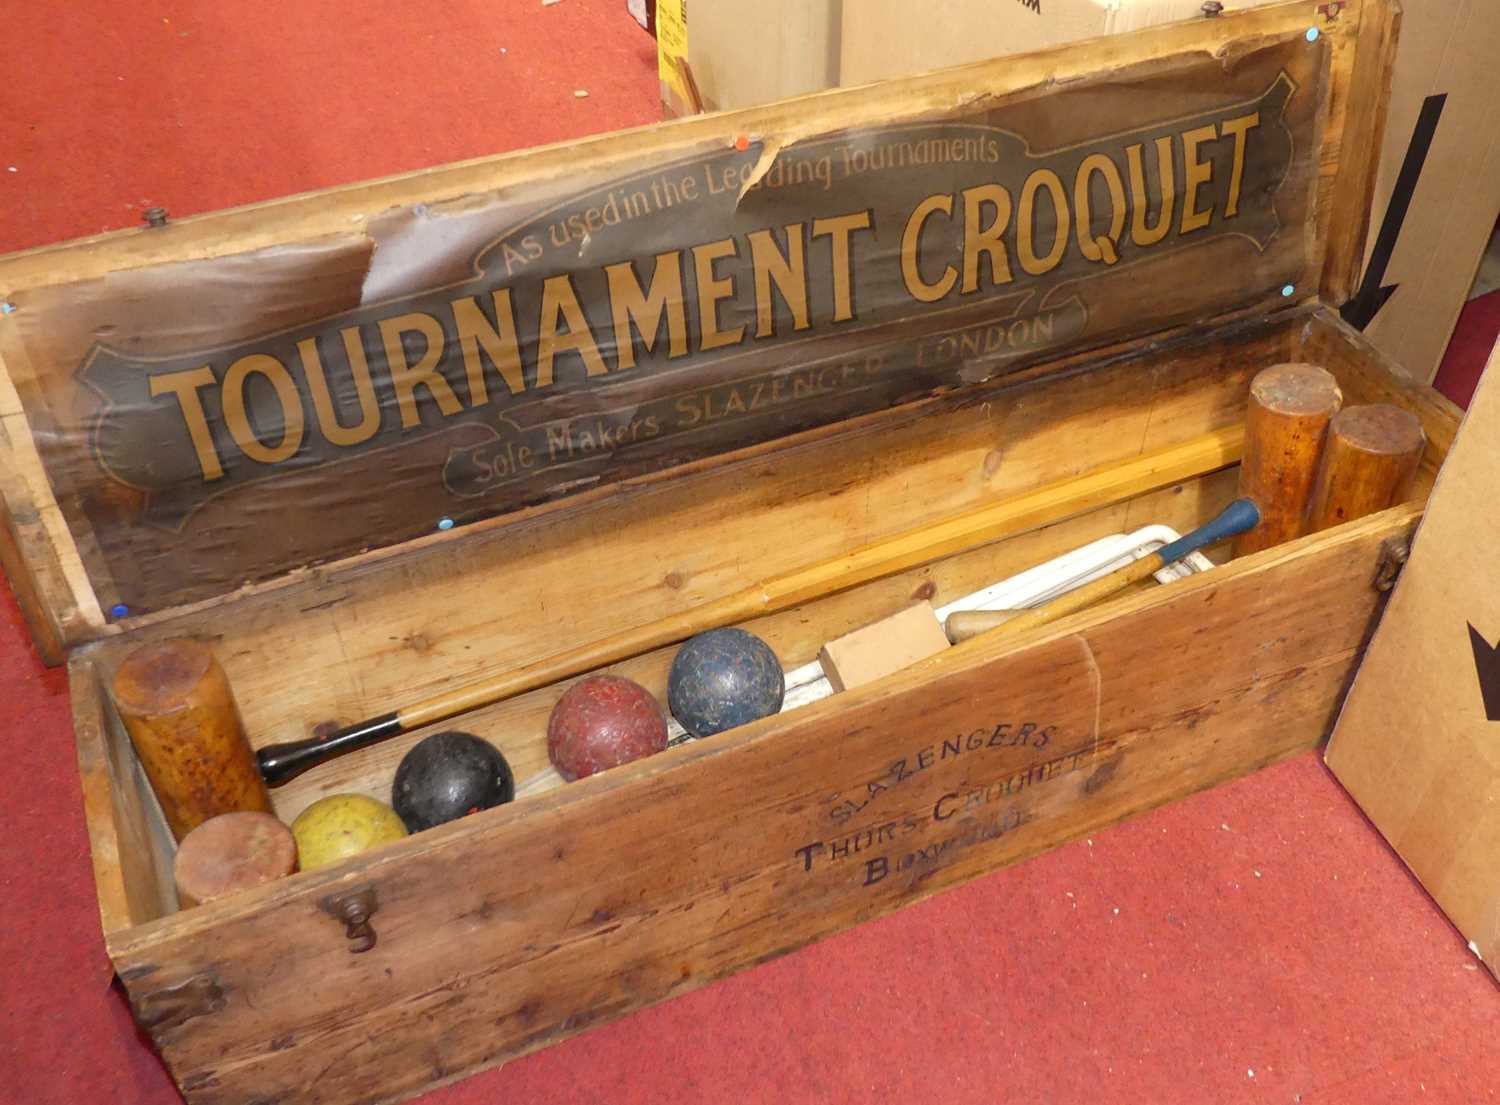 A Slazenger of London croquet set, the metal bound pine box containing four mallets, four coloured